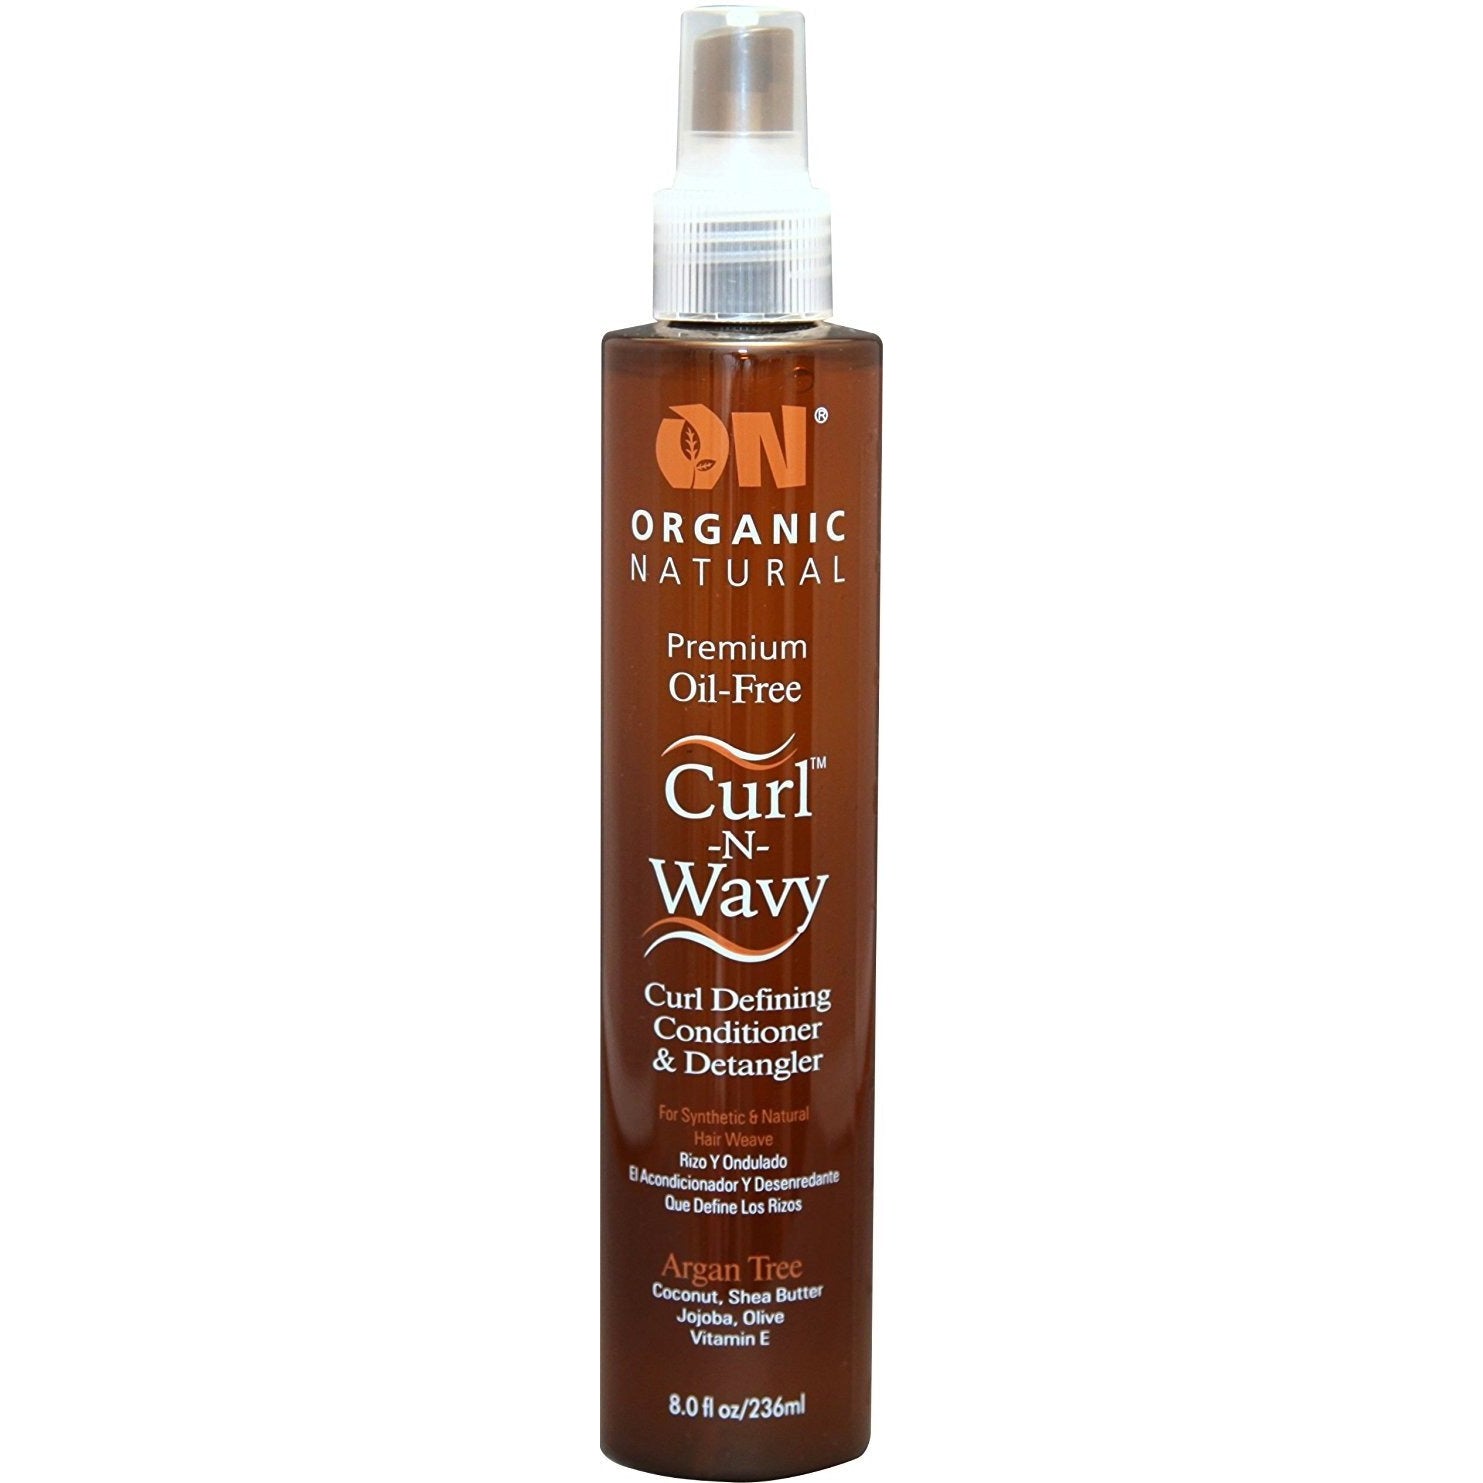 4th Ave Market: On Natural On Curl and Wavy Curl Defining Conditioner & Detangler, Argan Tree, 8 Oun